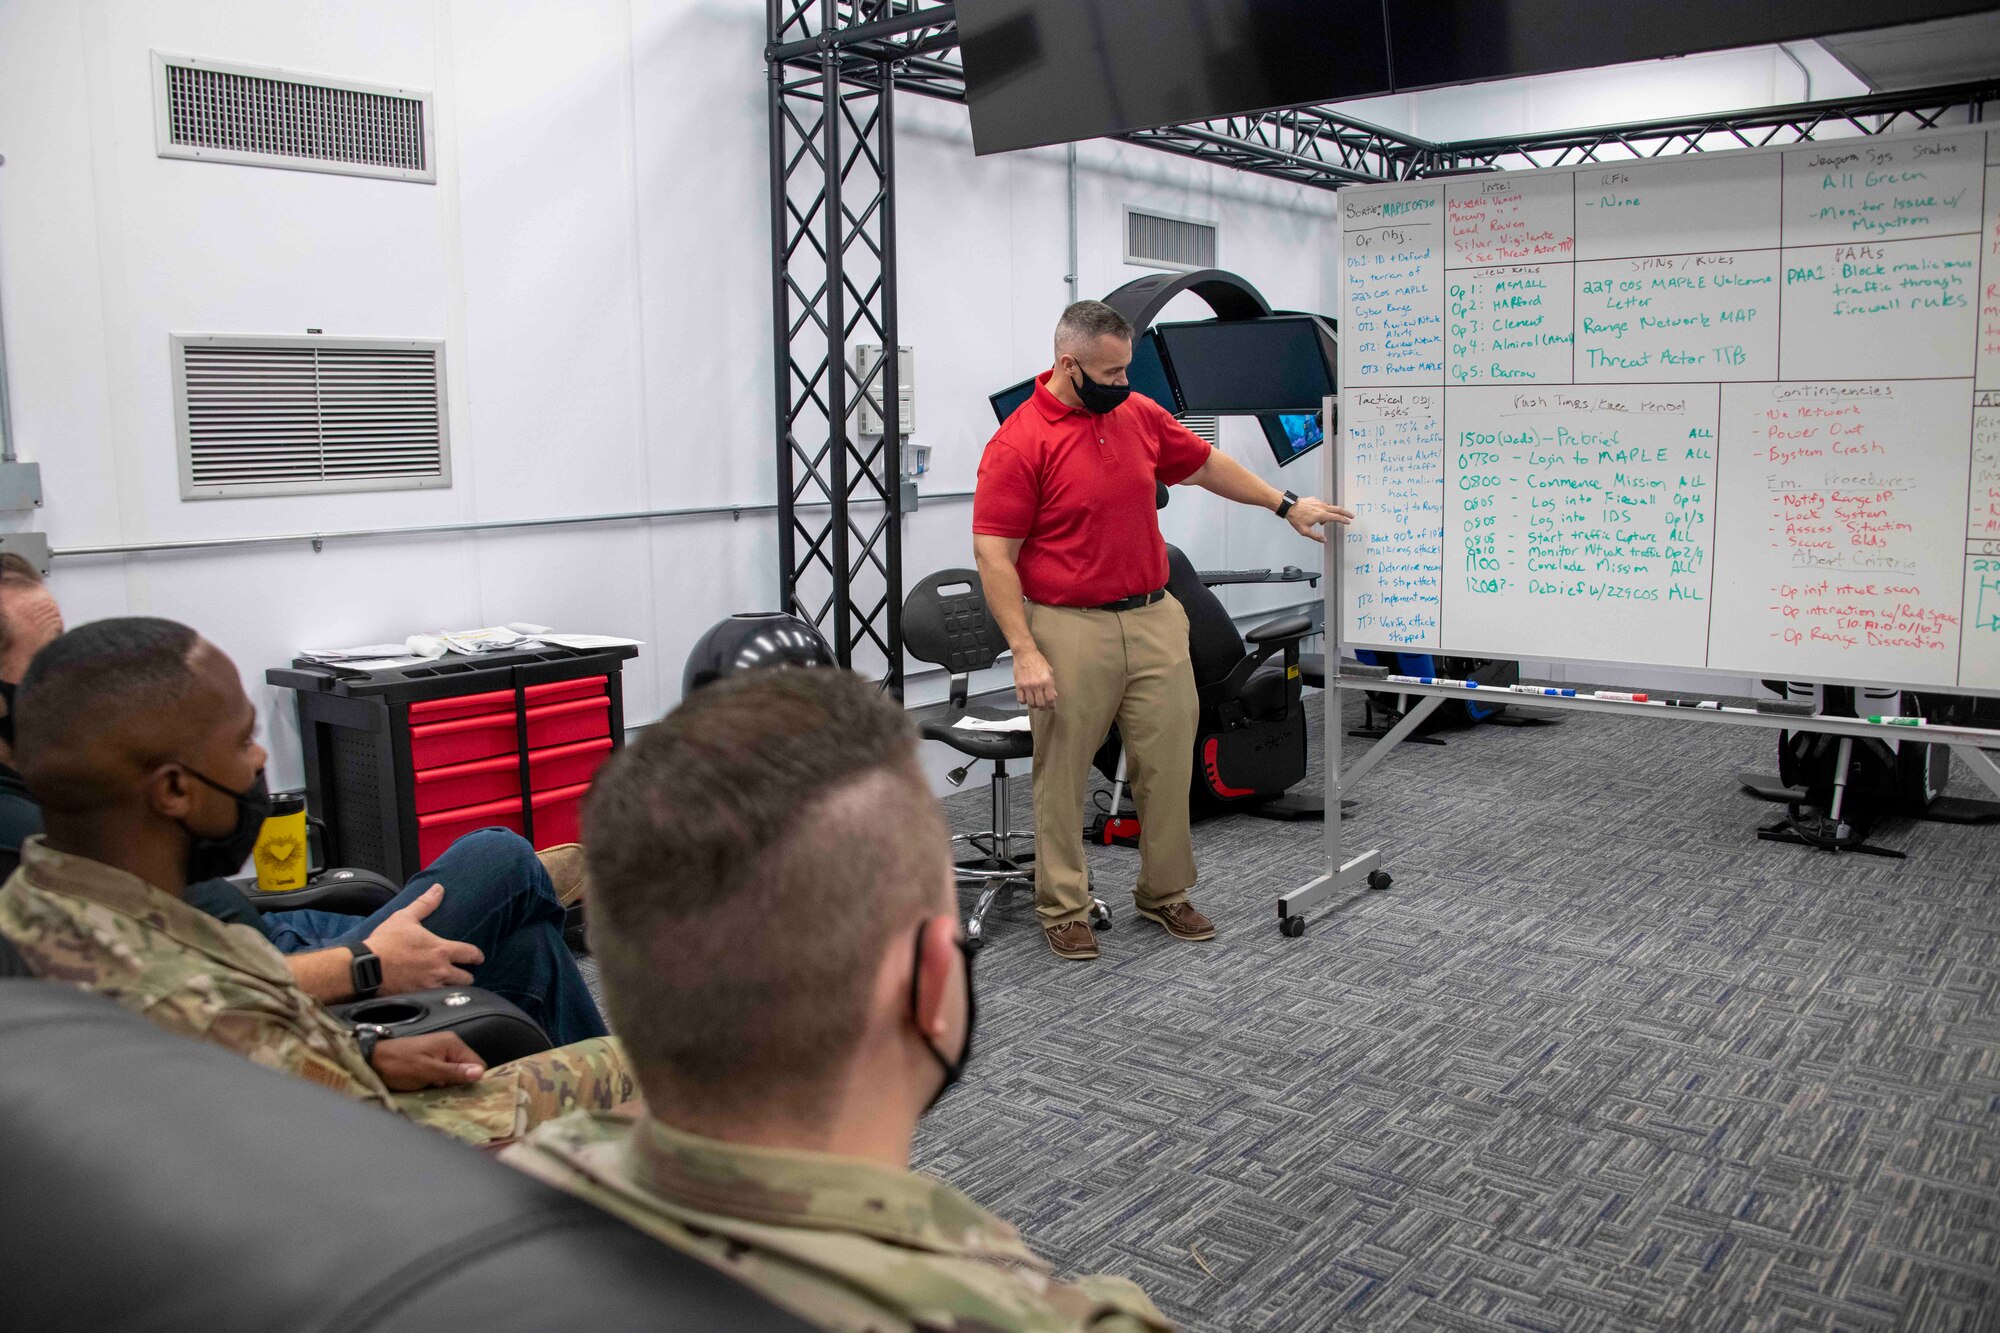 Christopher McMall, 97th Communications Squadron Mission Defense Team (MDT) special missions flight director, explains the exercise plan to the rest of the MDT at Altus Air Force Base, Oklahoma, Sept. 29, 2021. The objective of the exercise was to detect and block unauthorized or malicious network traffic, while maintaining legitimate traffic and services on the network. (U.S. Air Force photo by Staff Sgt. Cody Dowell)